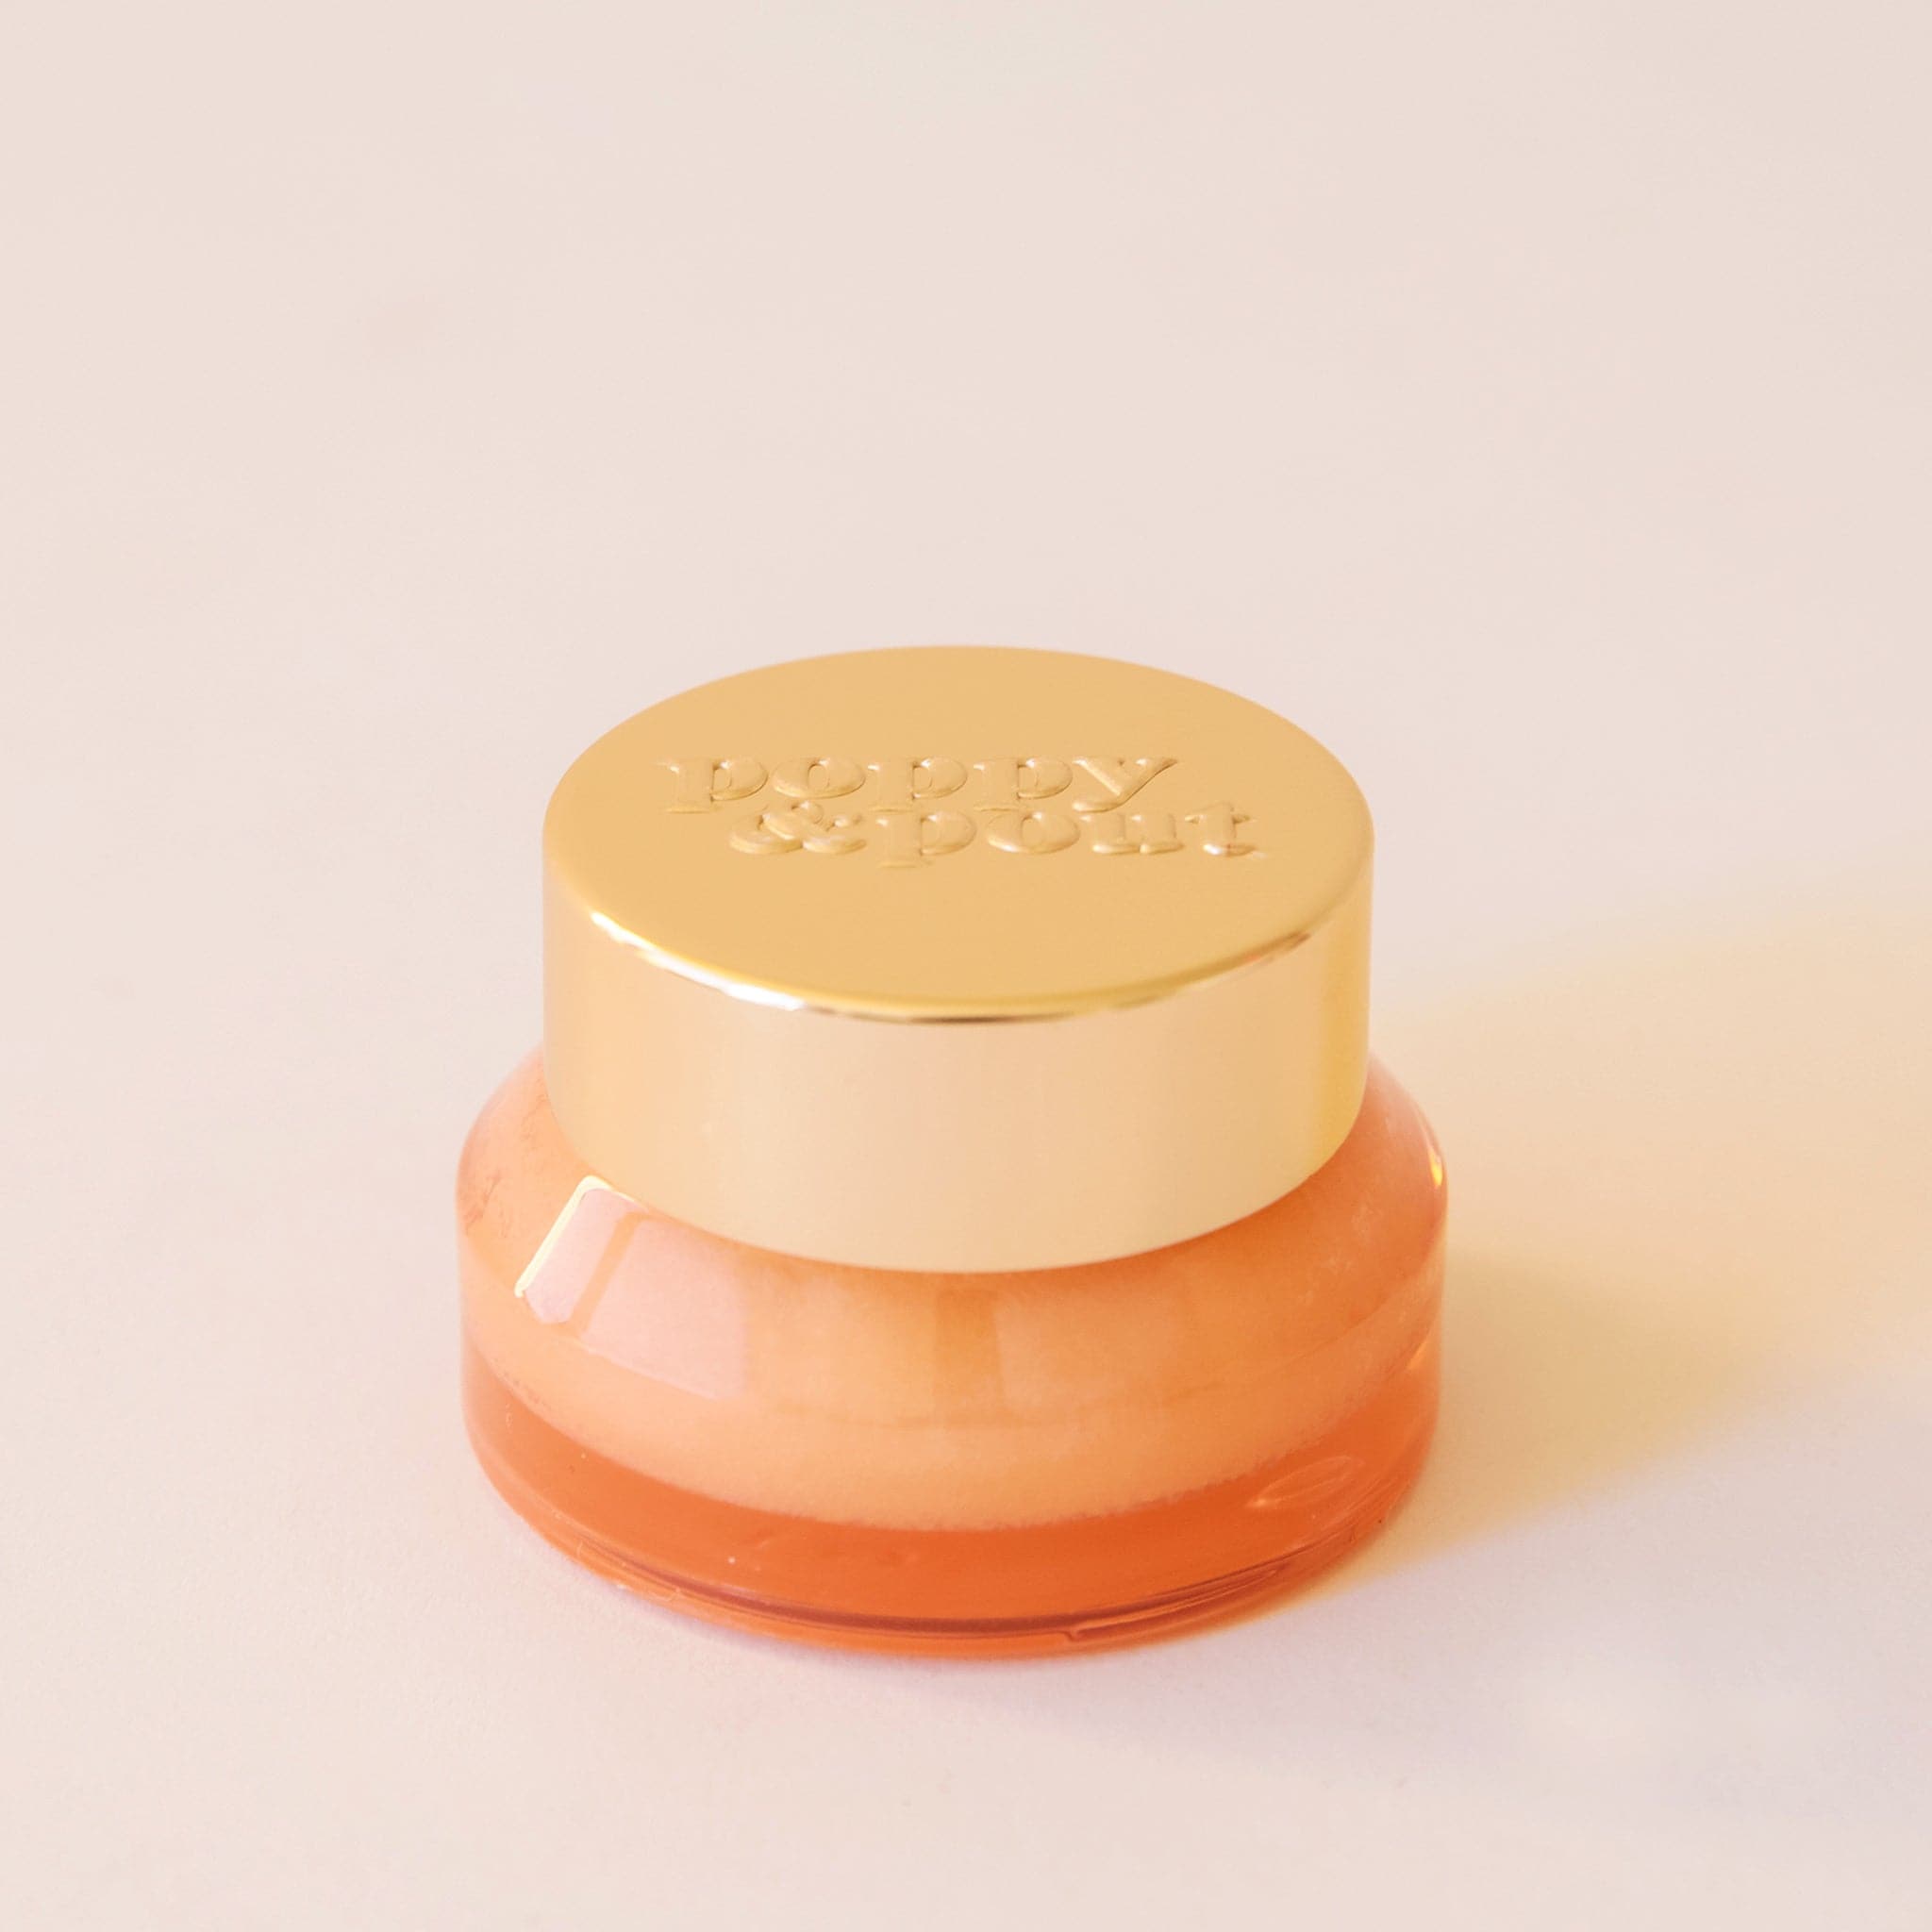 Lip scrub in an honeydew colored container with a gold lid. This lip scrub is grainy, hydrating and perfect for your lips.